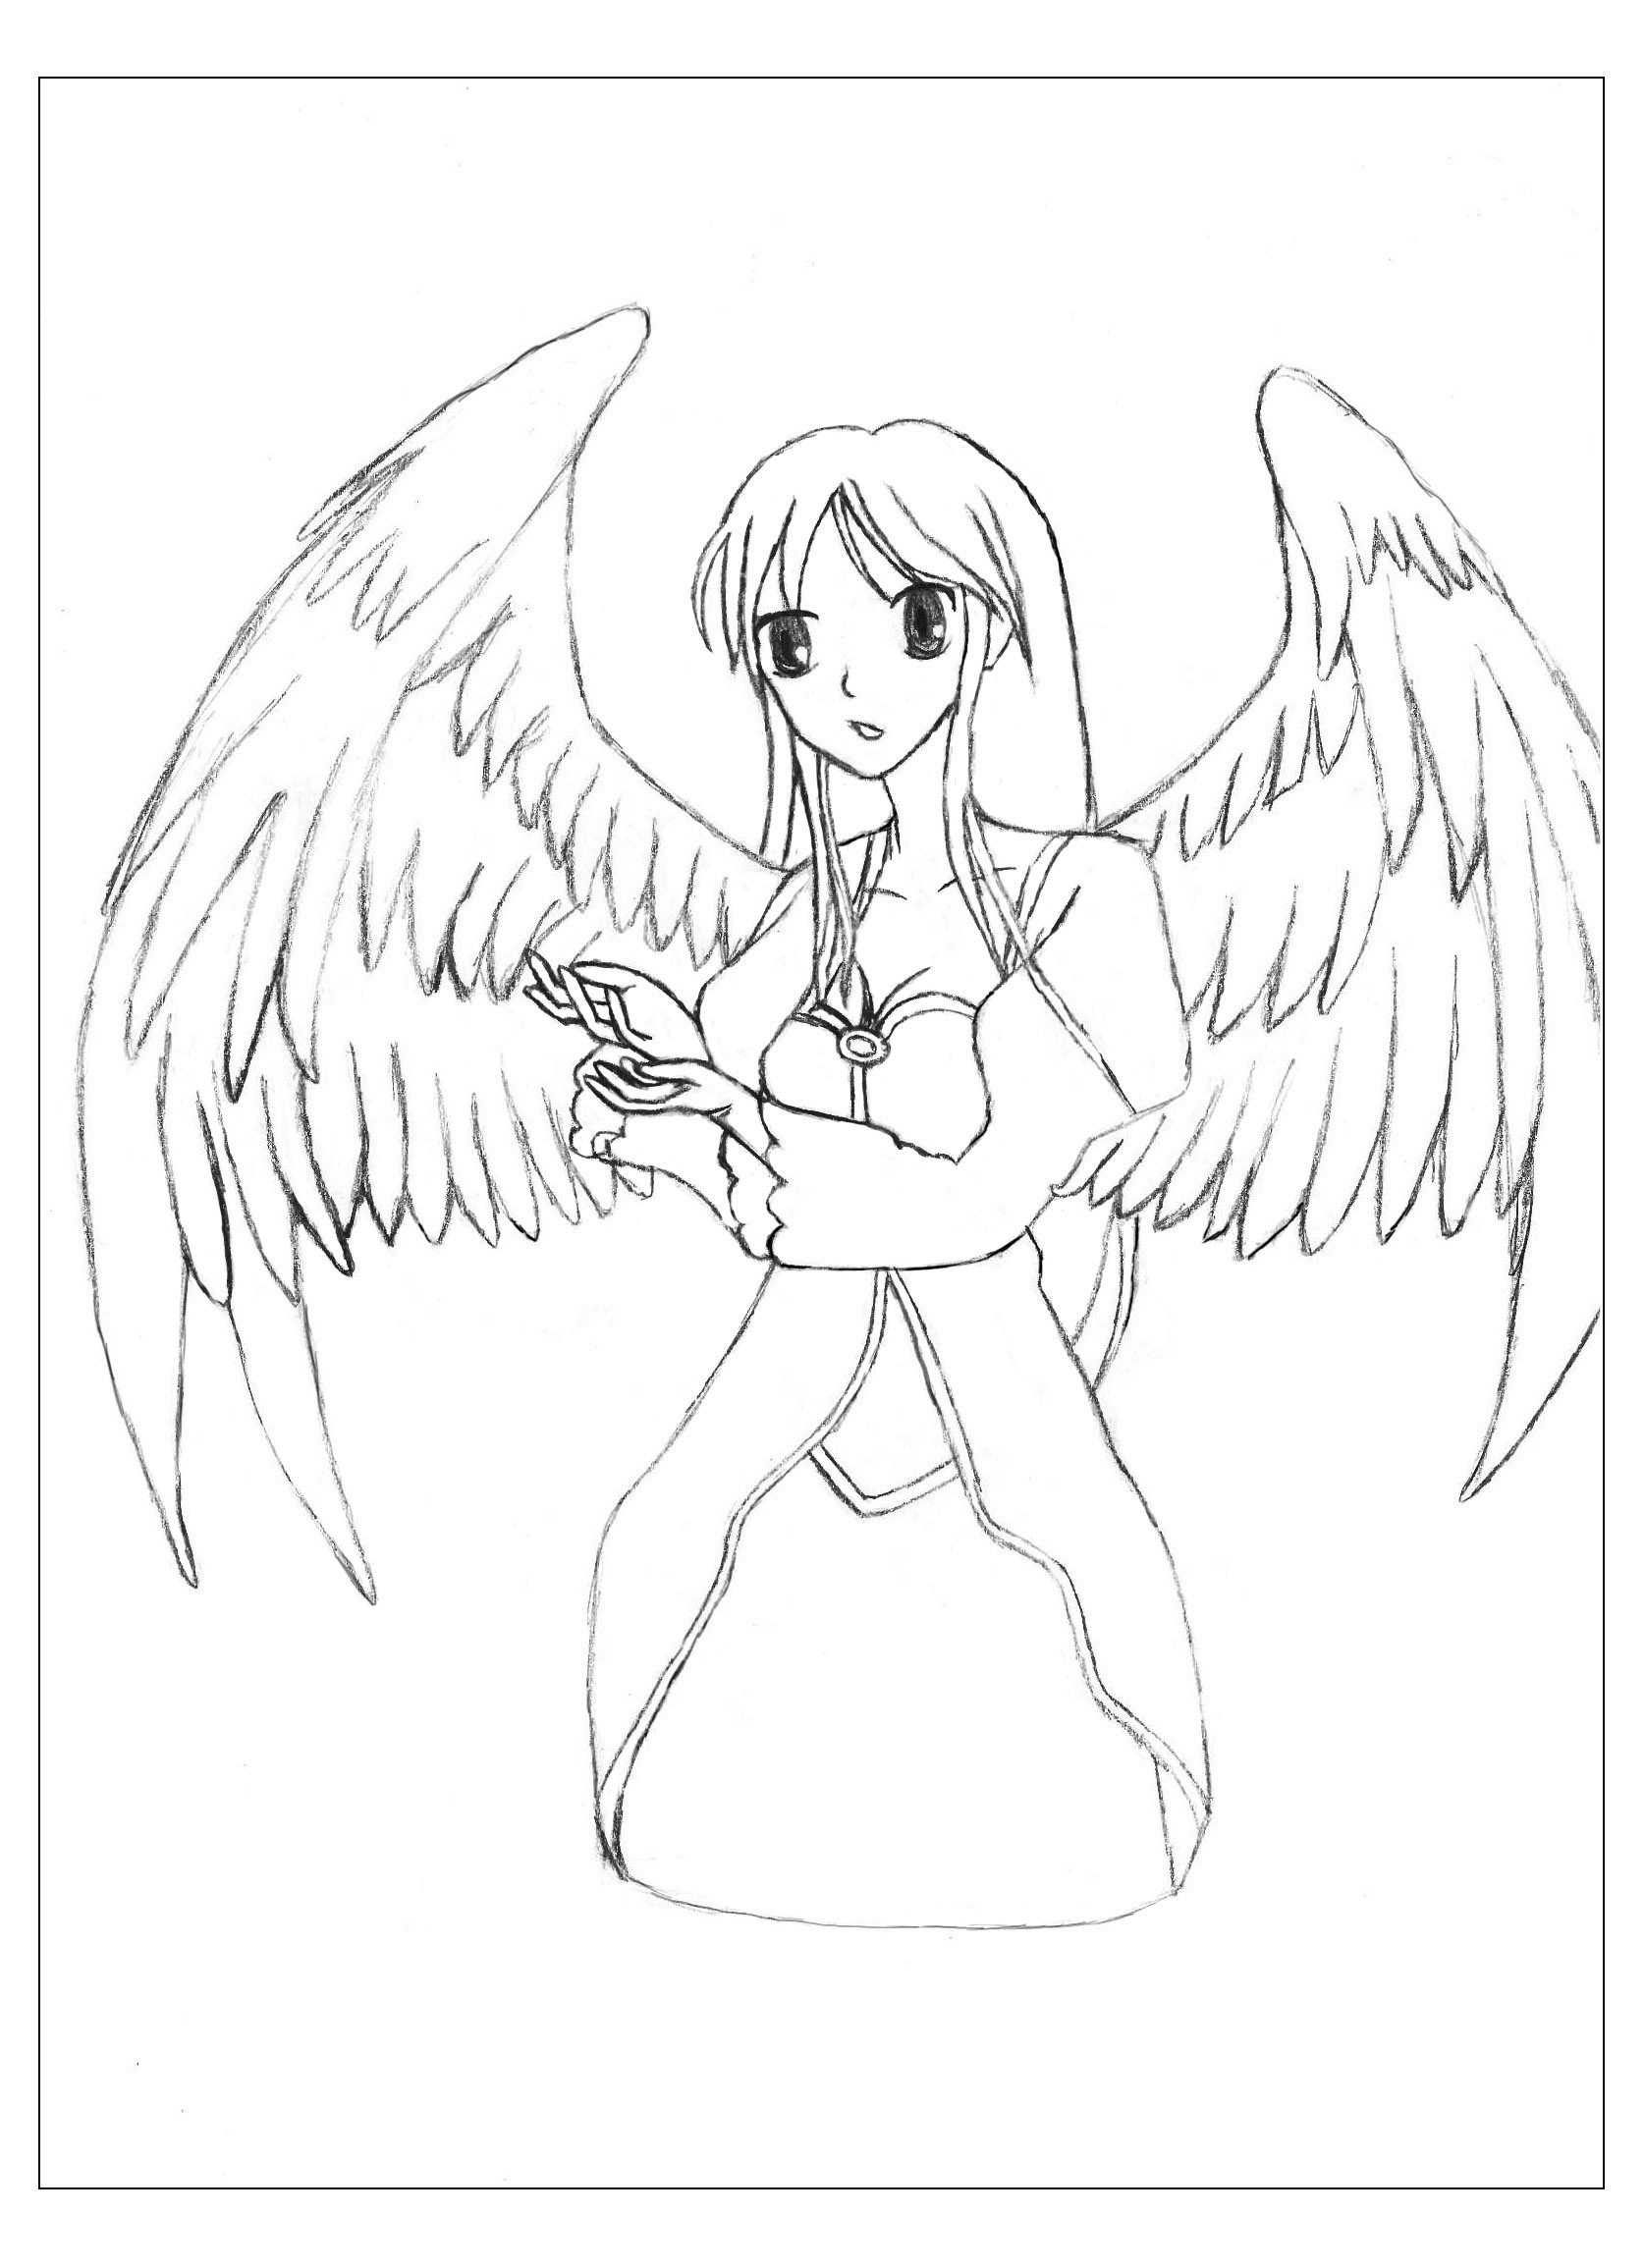 Download Manga to color for kids - Manga Kids Coloring Pages